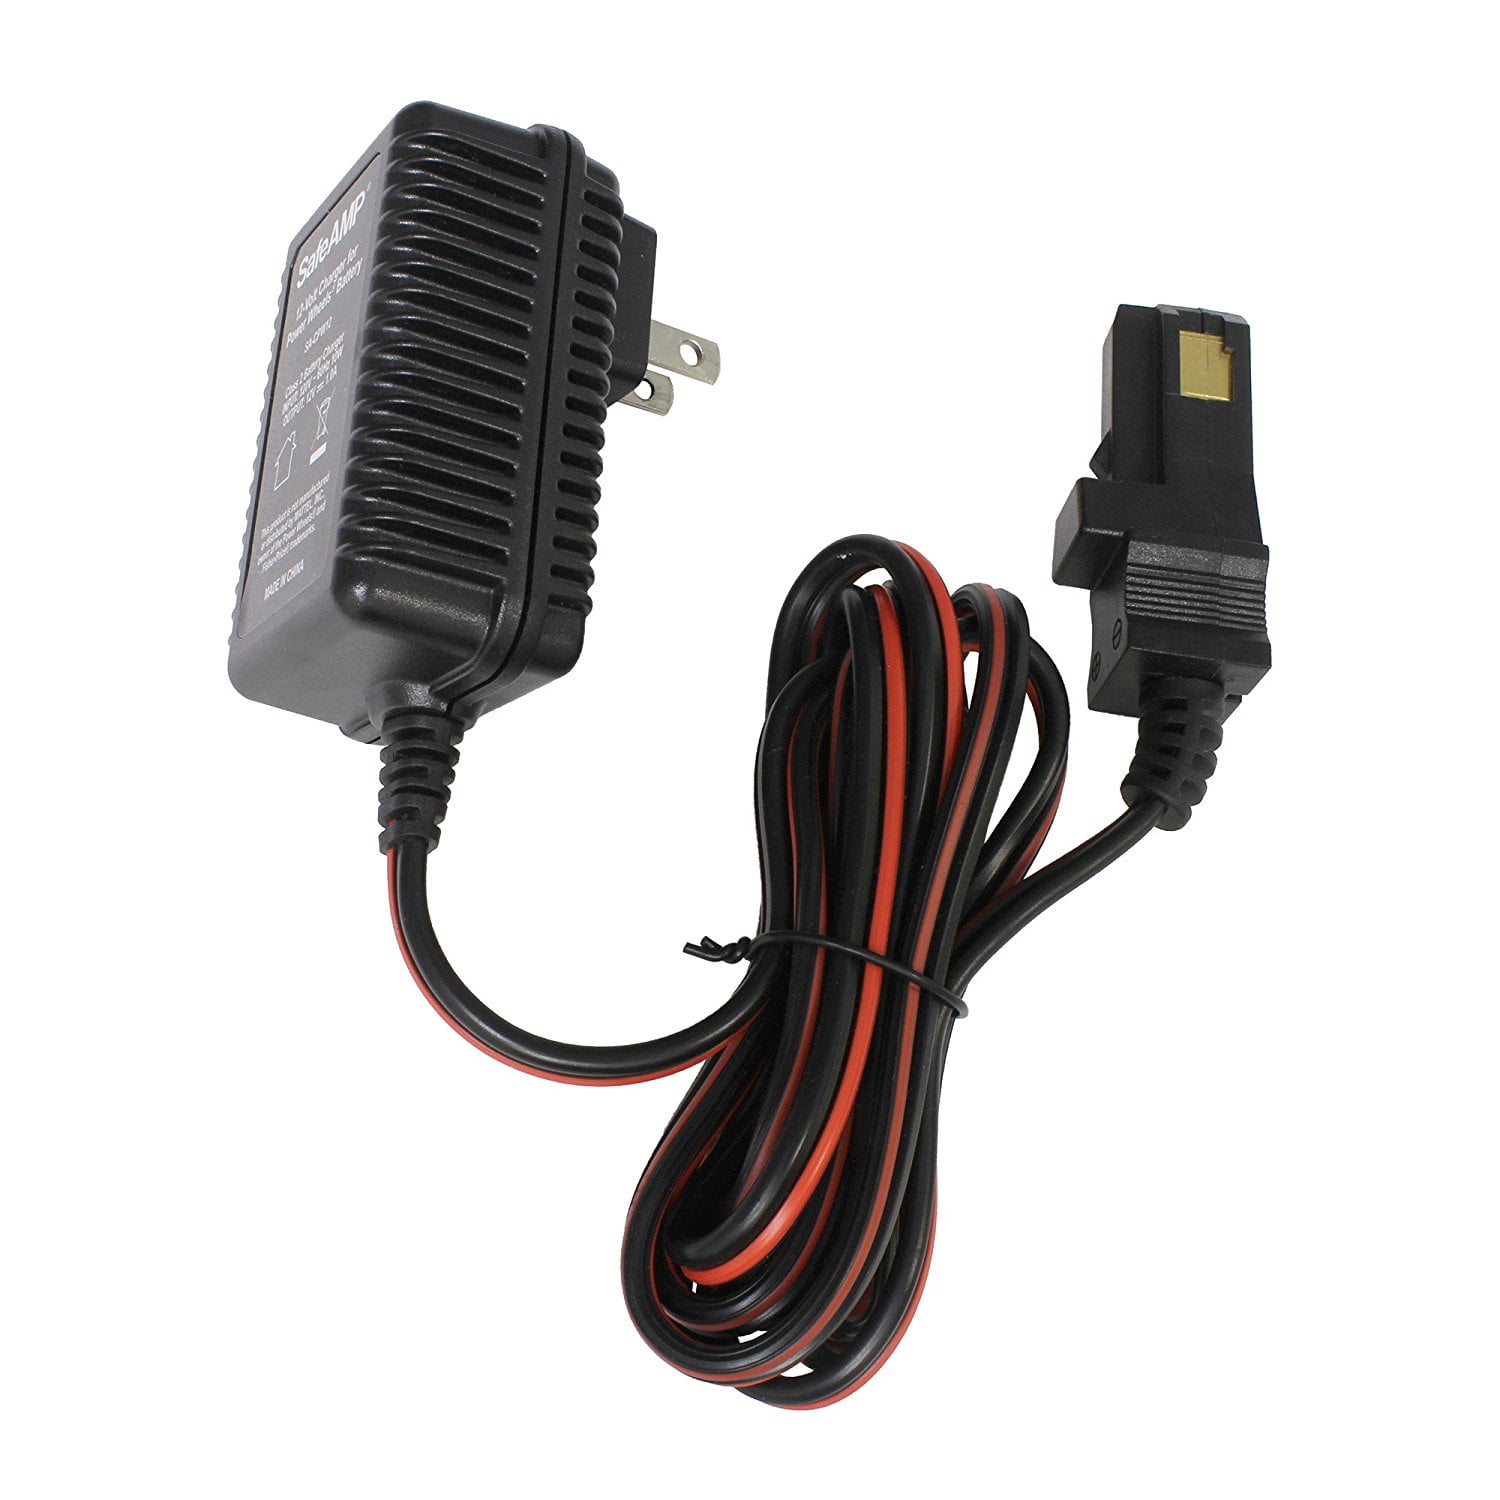 Power Wheels Class 2 12v Battery Charger for sale online 